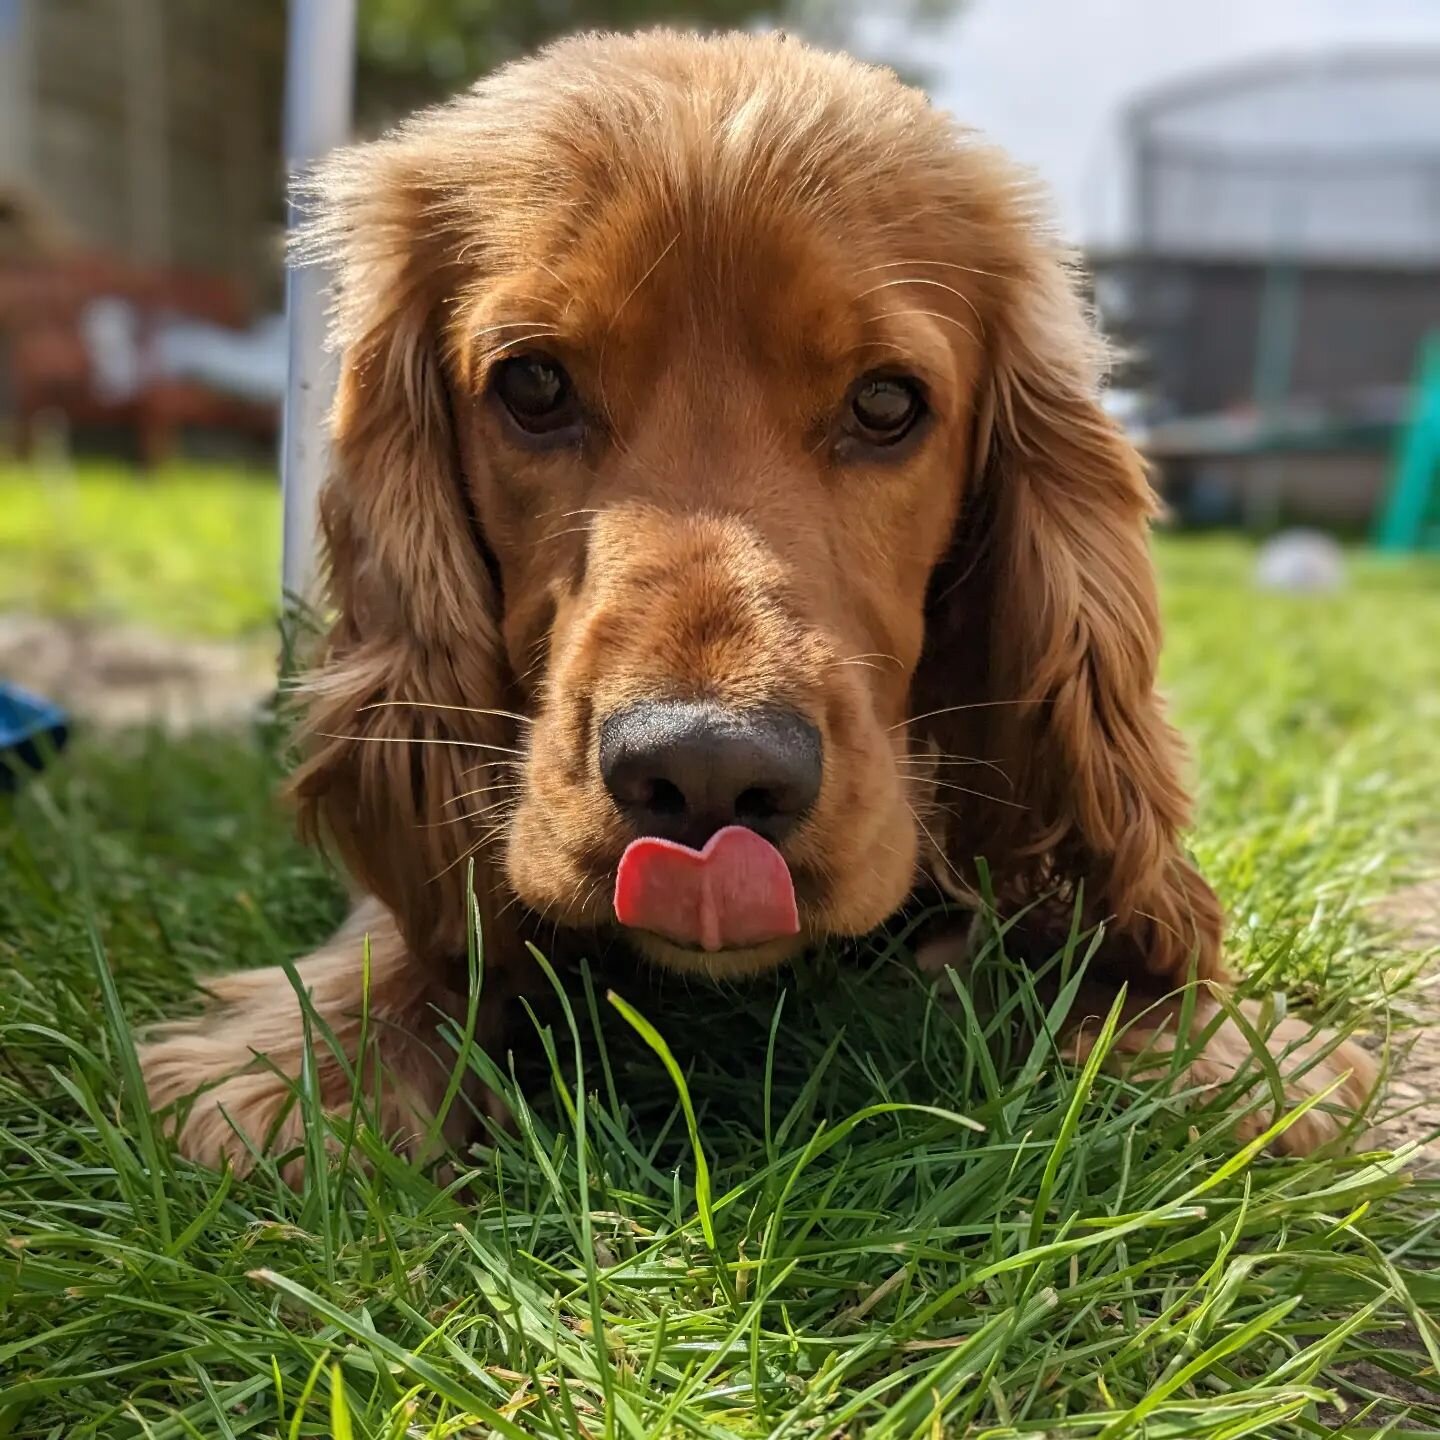 Marlow had a lovely day playing in the garden today! I took this picture withy Pixel 6A by @gpogle#teampixel #mobilephotographer #mobilephotography #cockerspaniel #spaniellife #cockerspanielsofinstagram